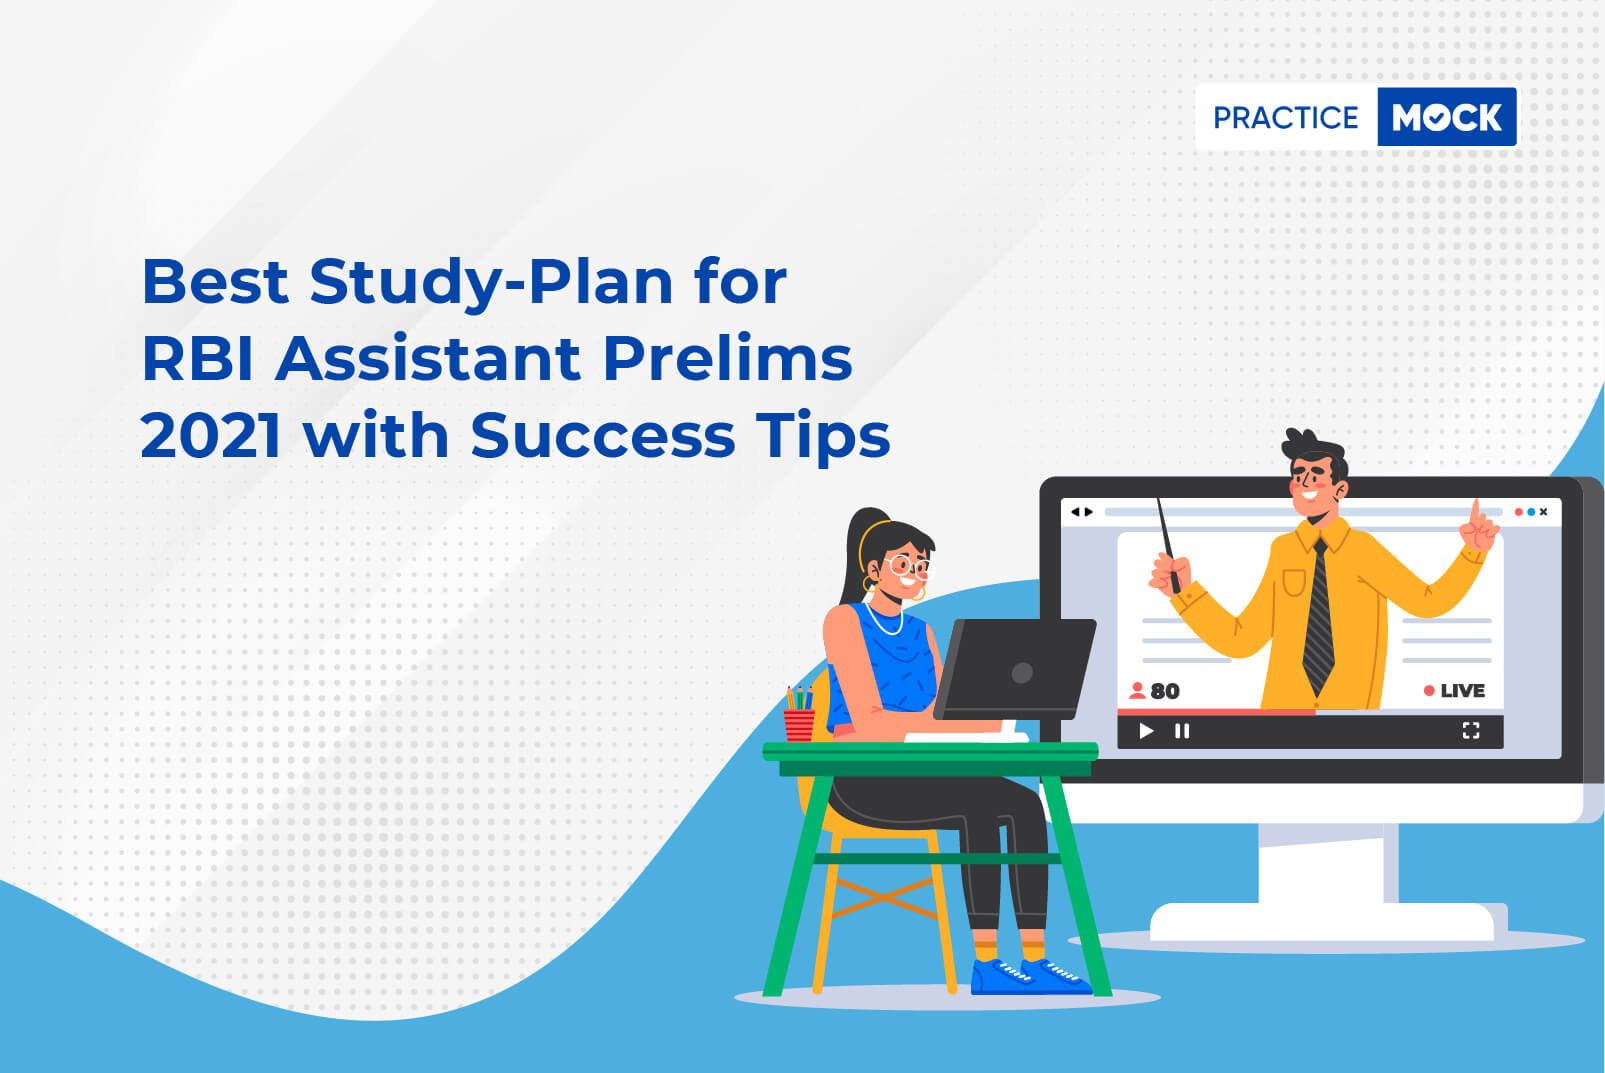 Best Study-Plan for RBI Assistant Prelims 2021 with Success Tips